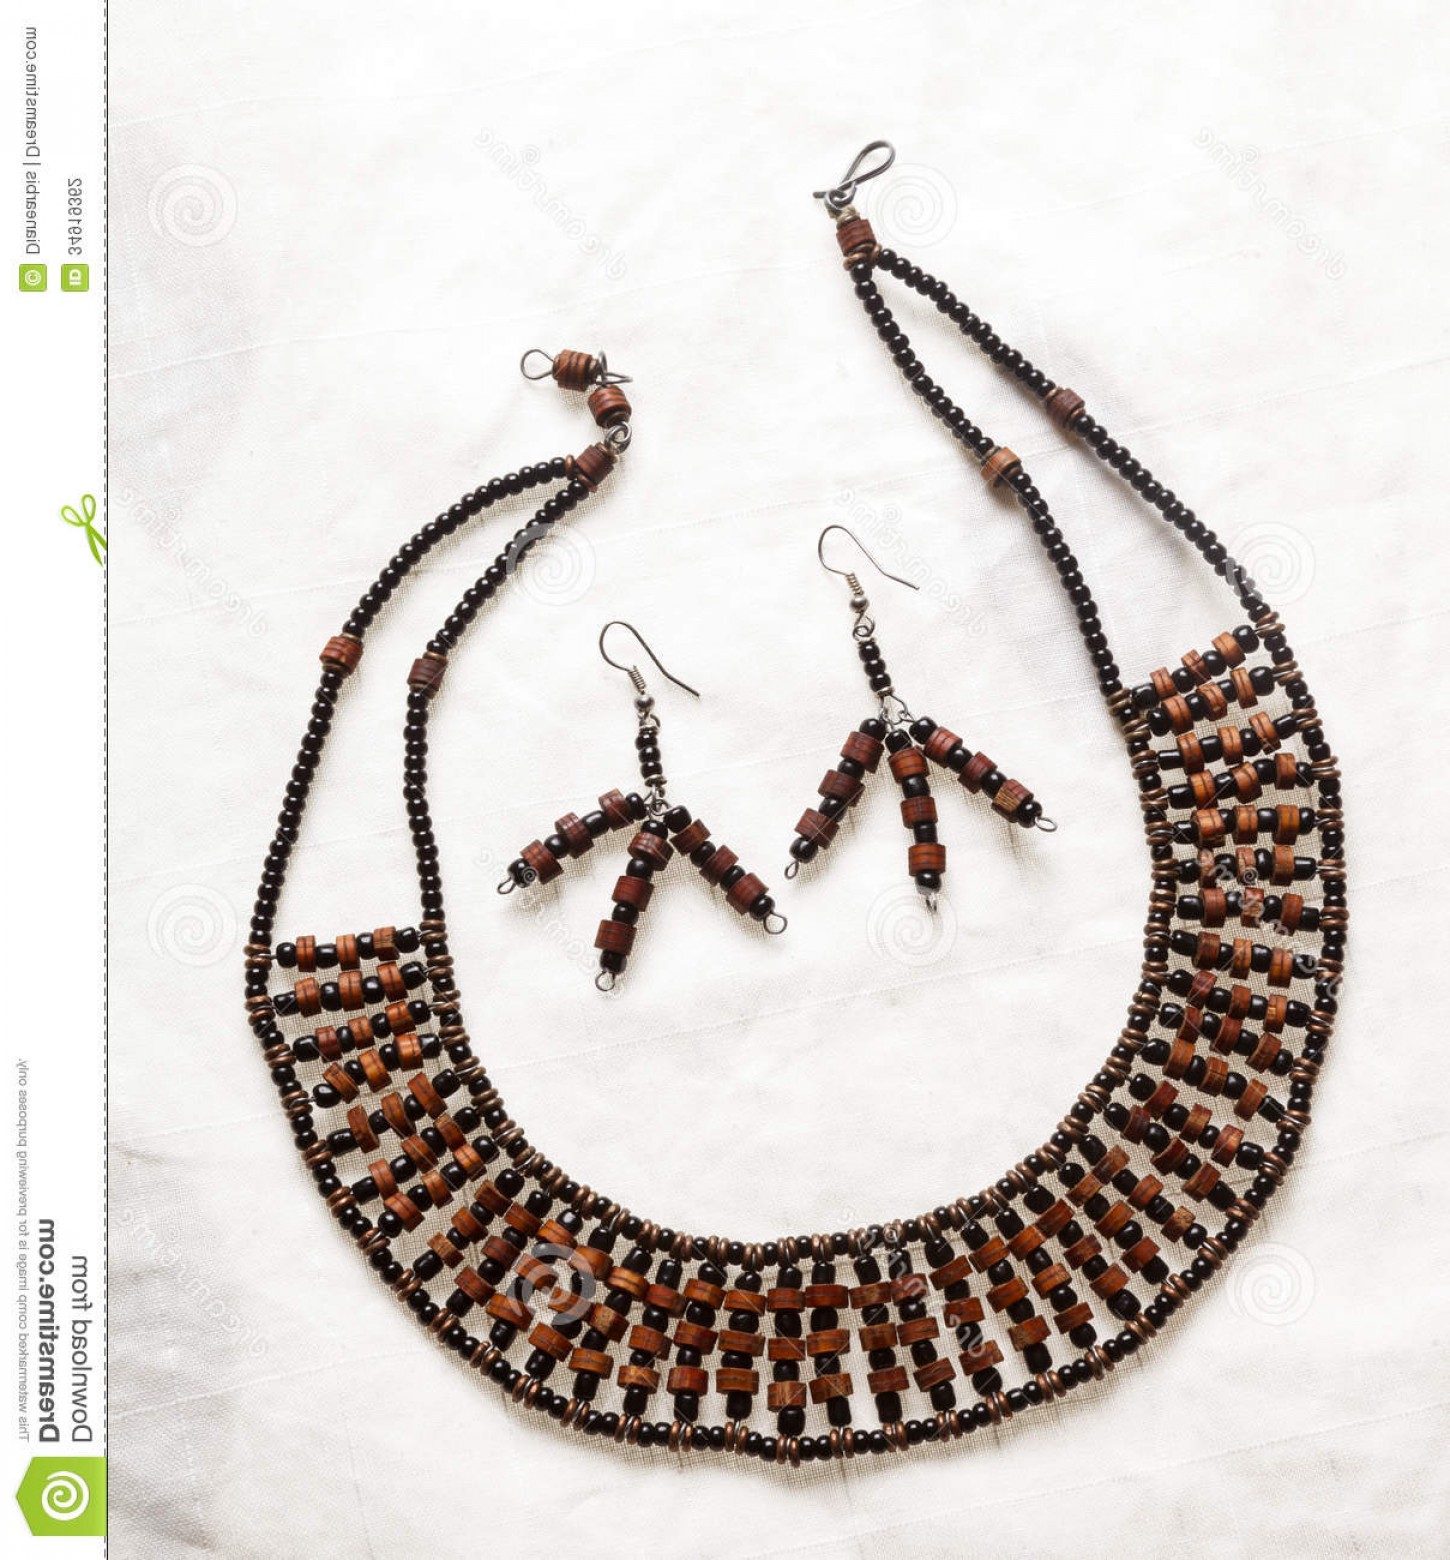 Stock Photography South African Jewelry Necklace Earrings Handmade ...